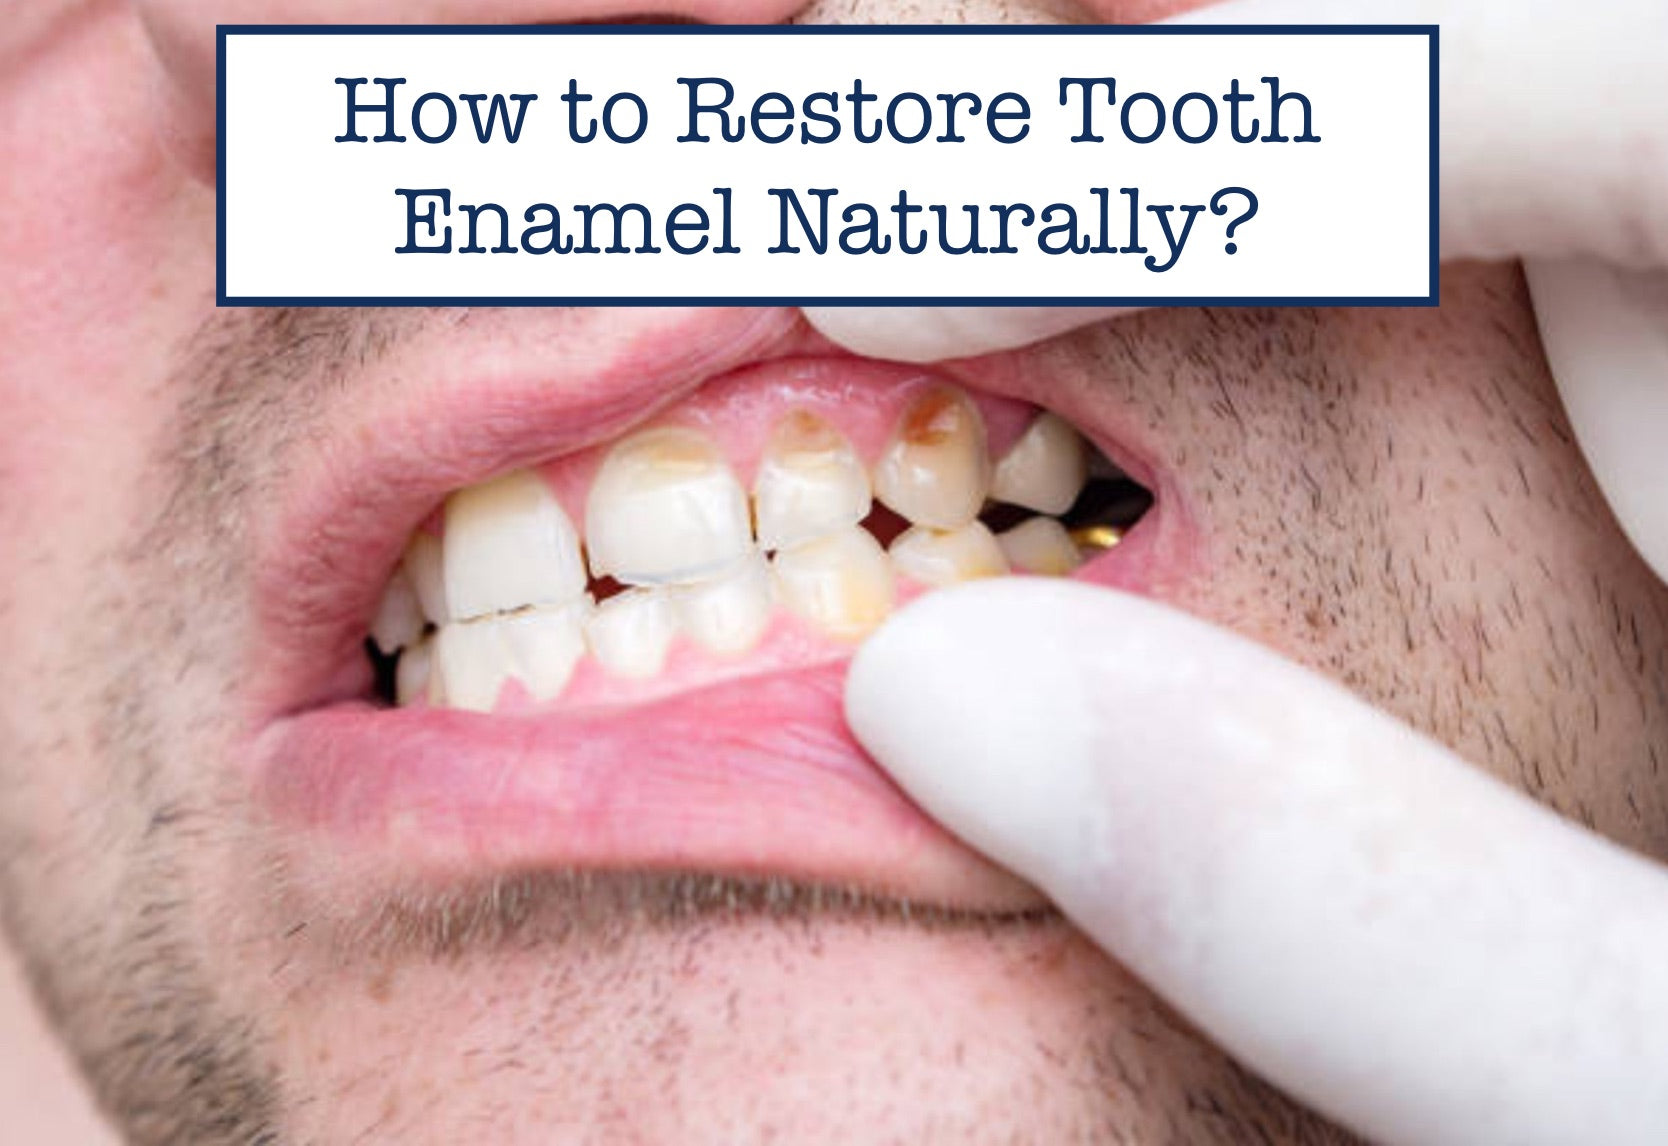 How to Restore Tooth Enamel Naturally